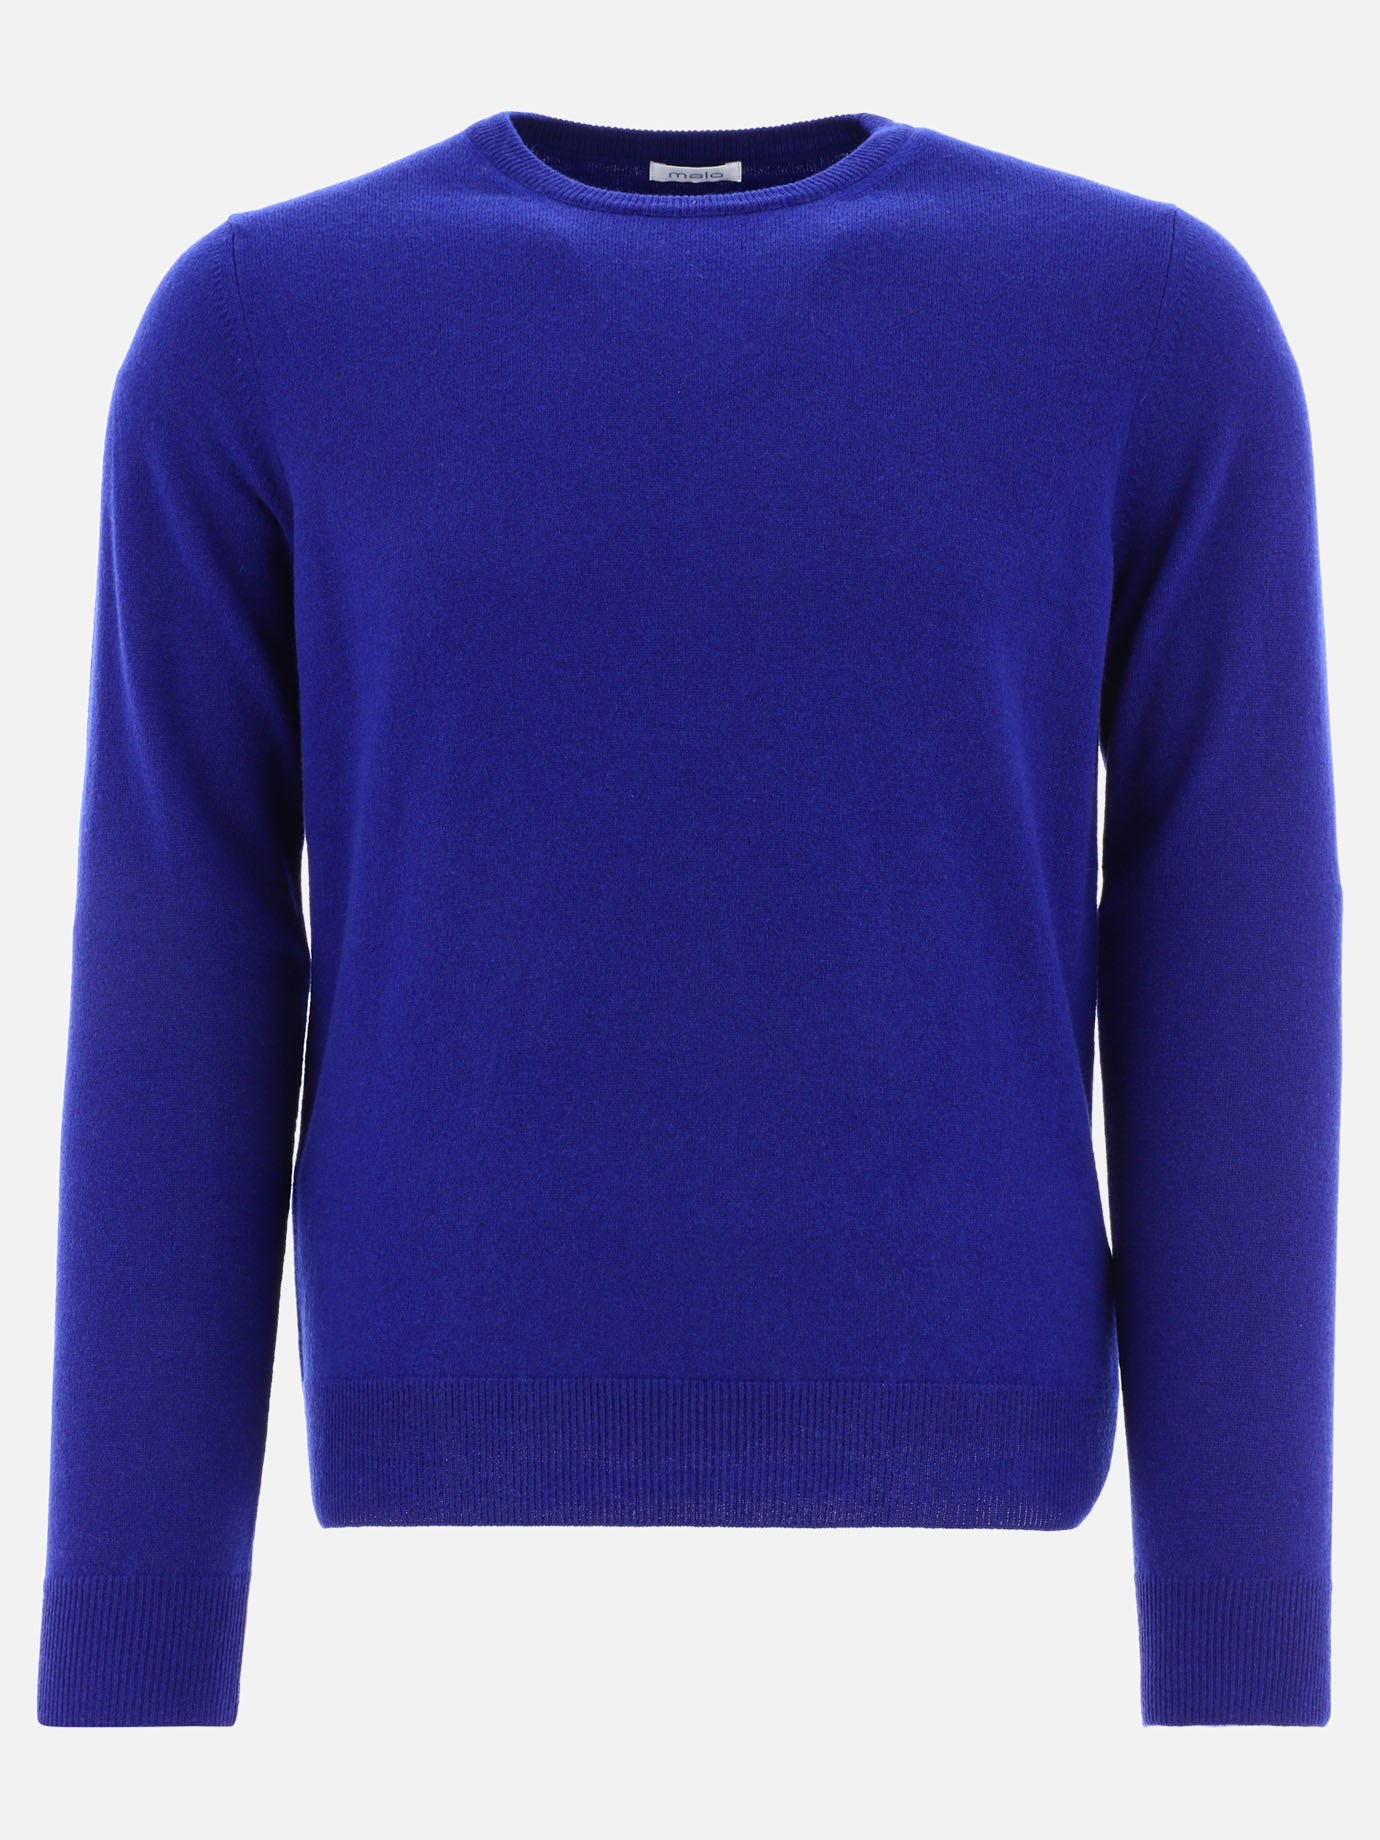 Sweater featuring ribbed hem and cuffsby Malo - 1